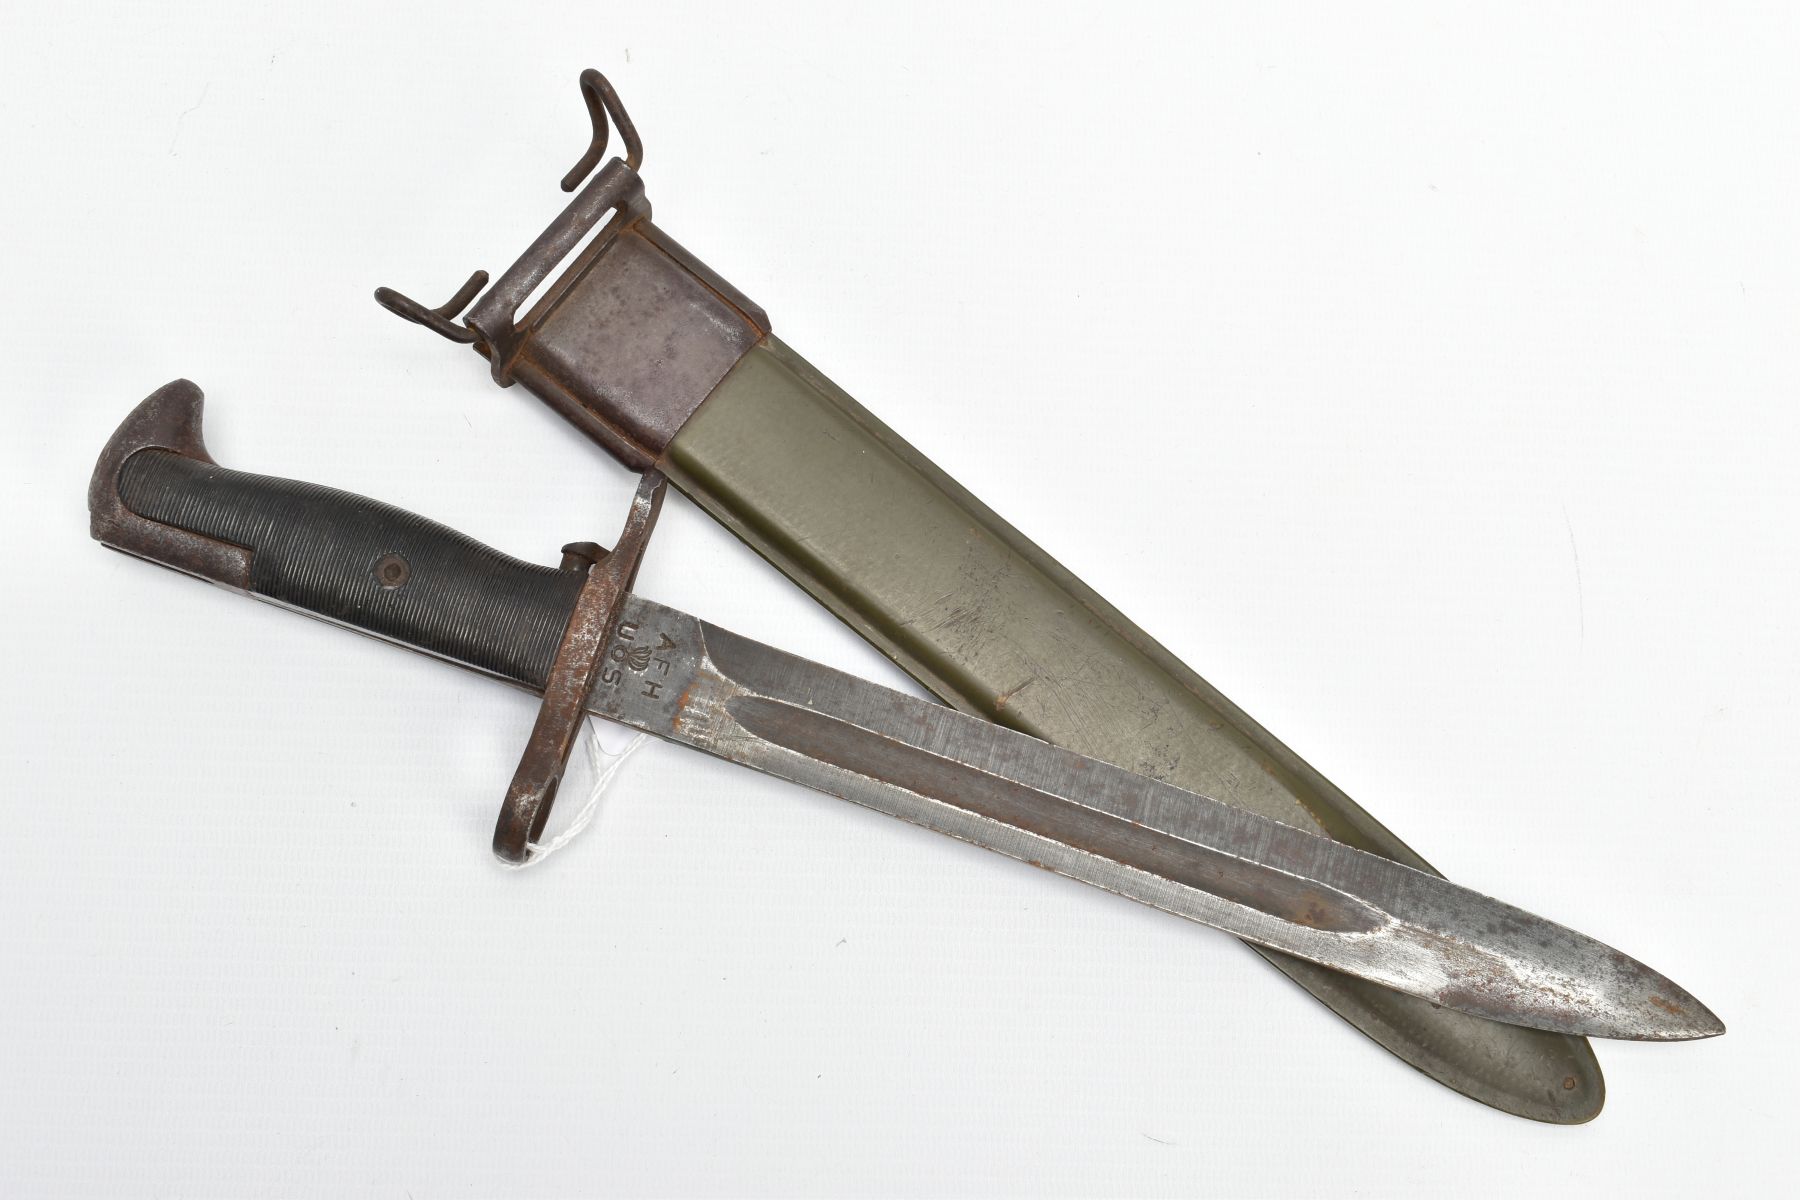 A WORLD WAR TWO ERA US ARMY BAYONET & SCABBARD, by American Fork & Hoe Company, period for this